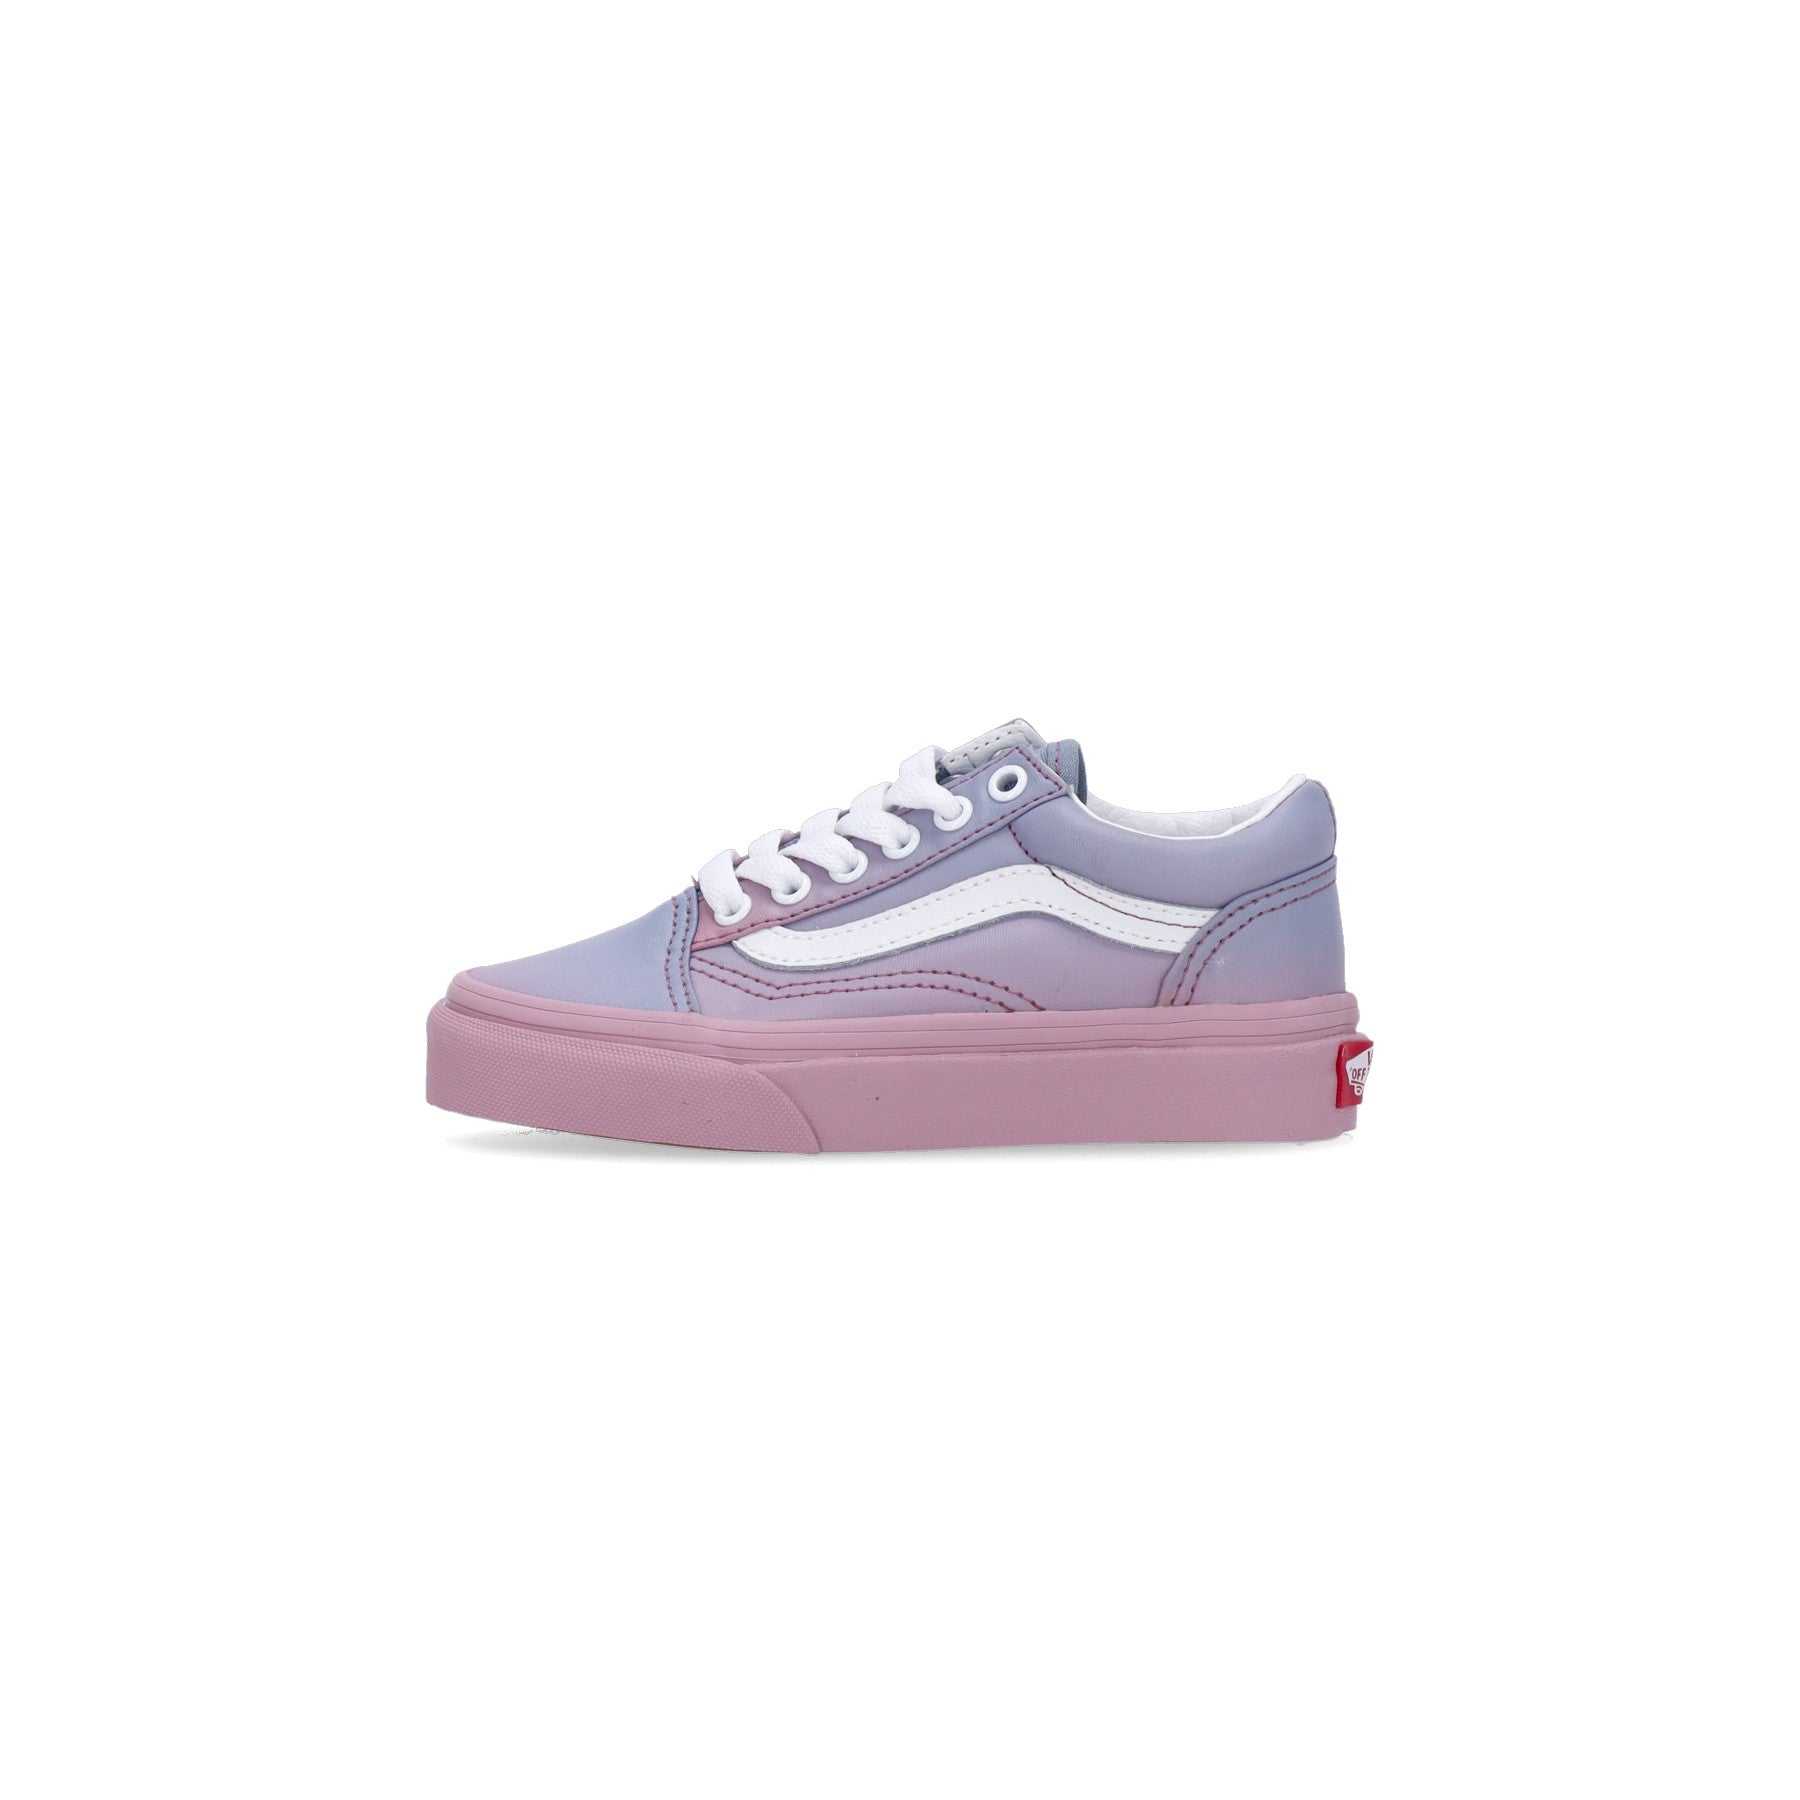 Low Shoe Girl Old Skool Sunset Fade Lilas